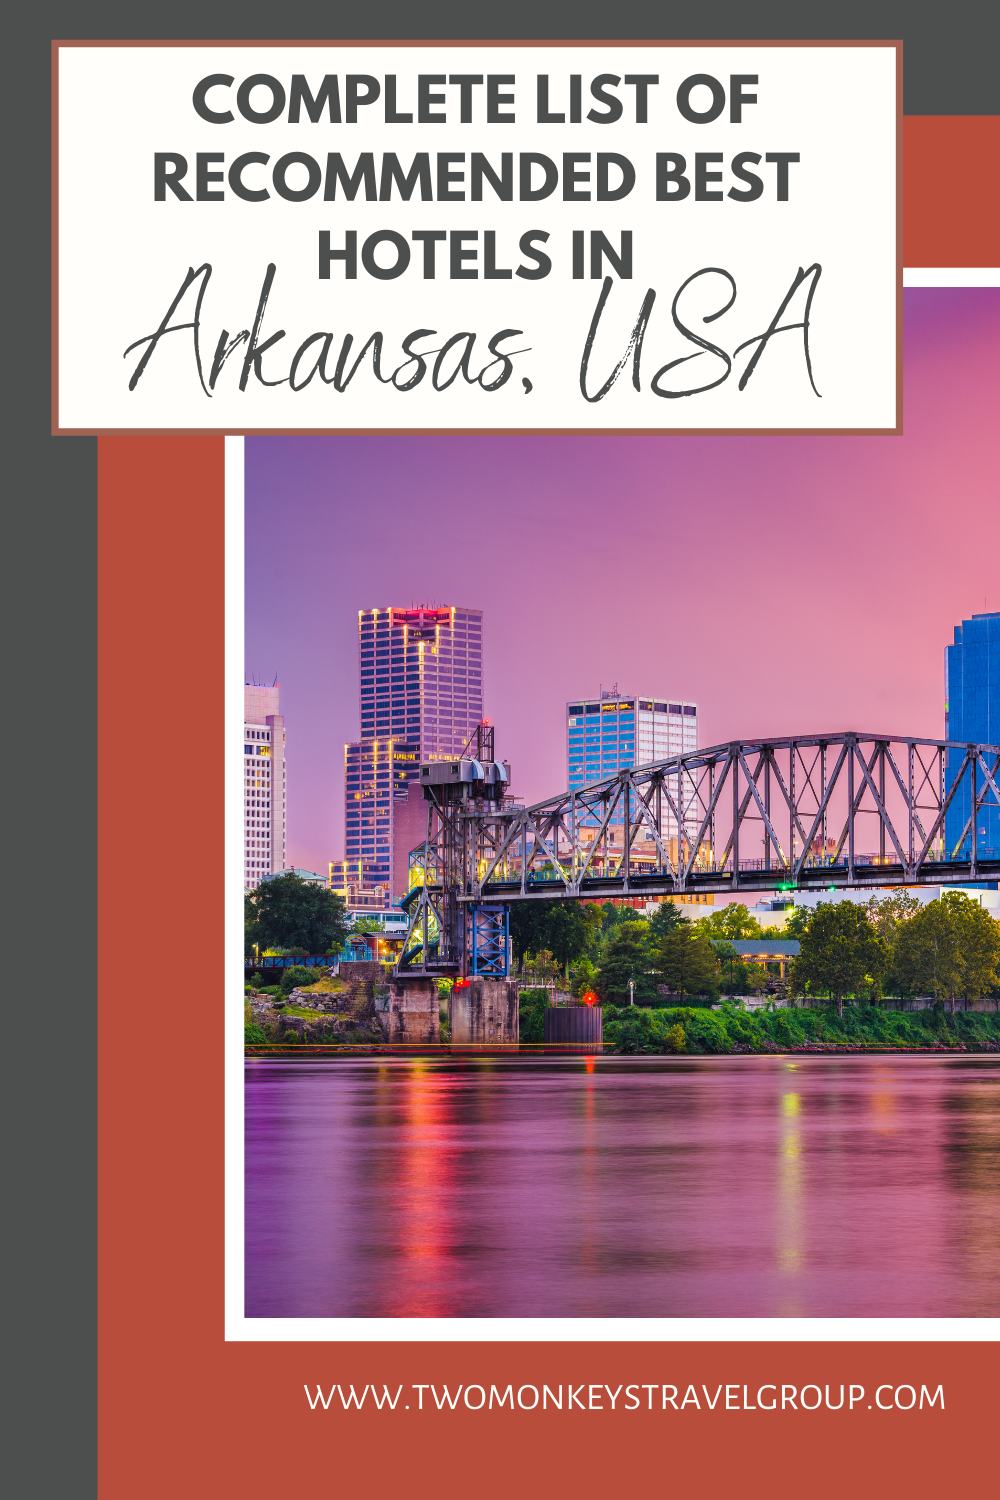 Complete List of Recommended Best Hotels in Arkansas, USA